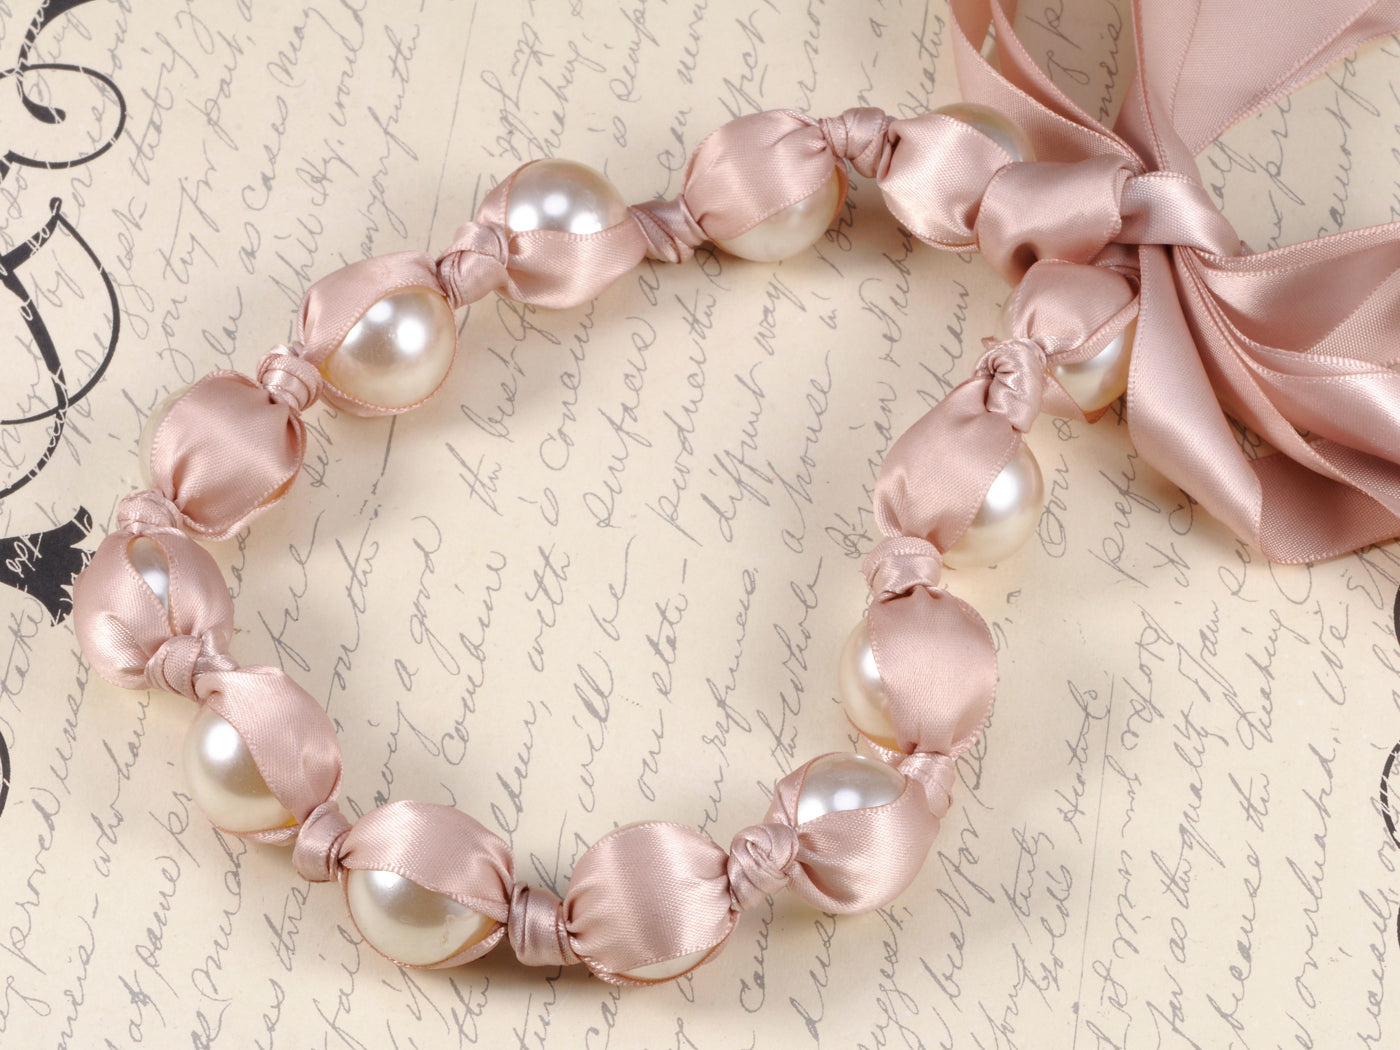 Light Pink White Pearl Bead Ribbon Laced Jewelry Necklace